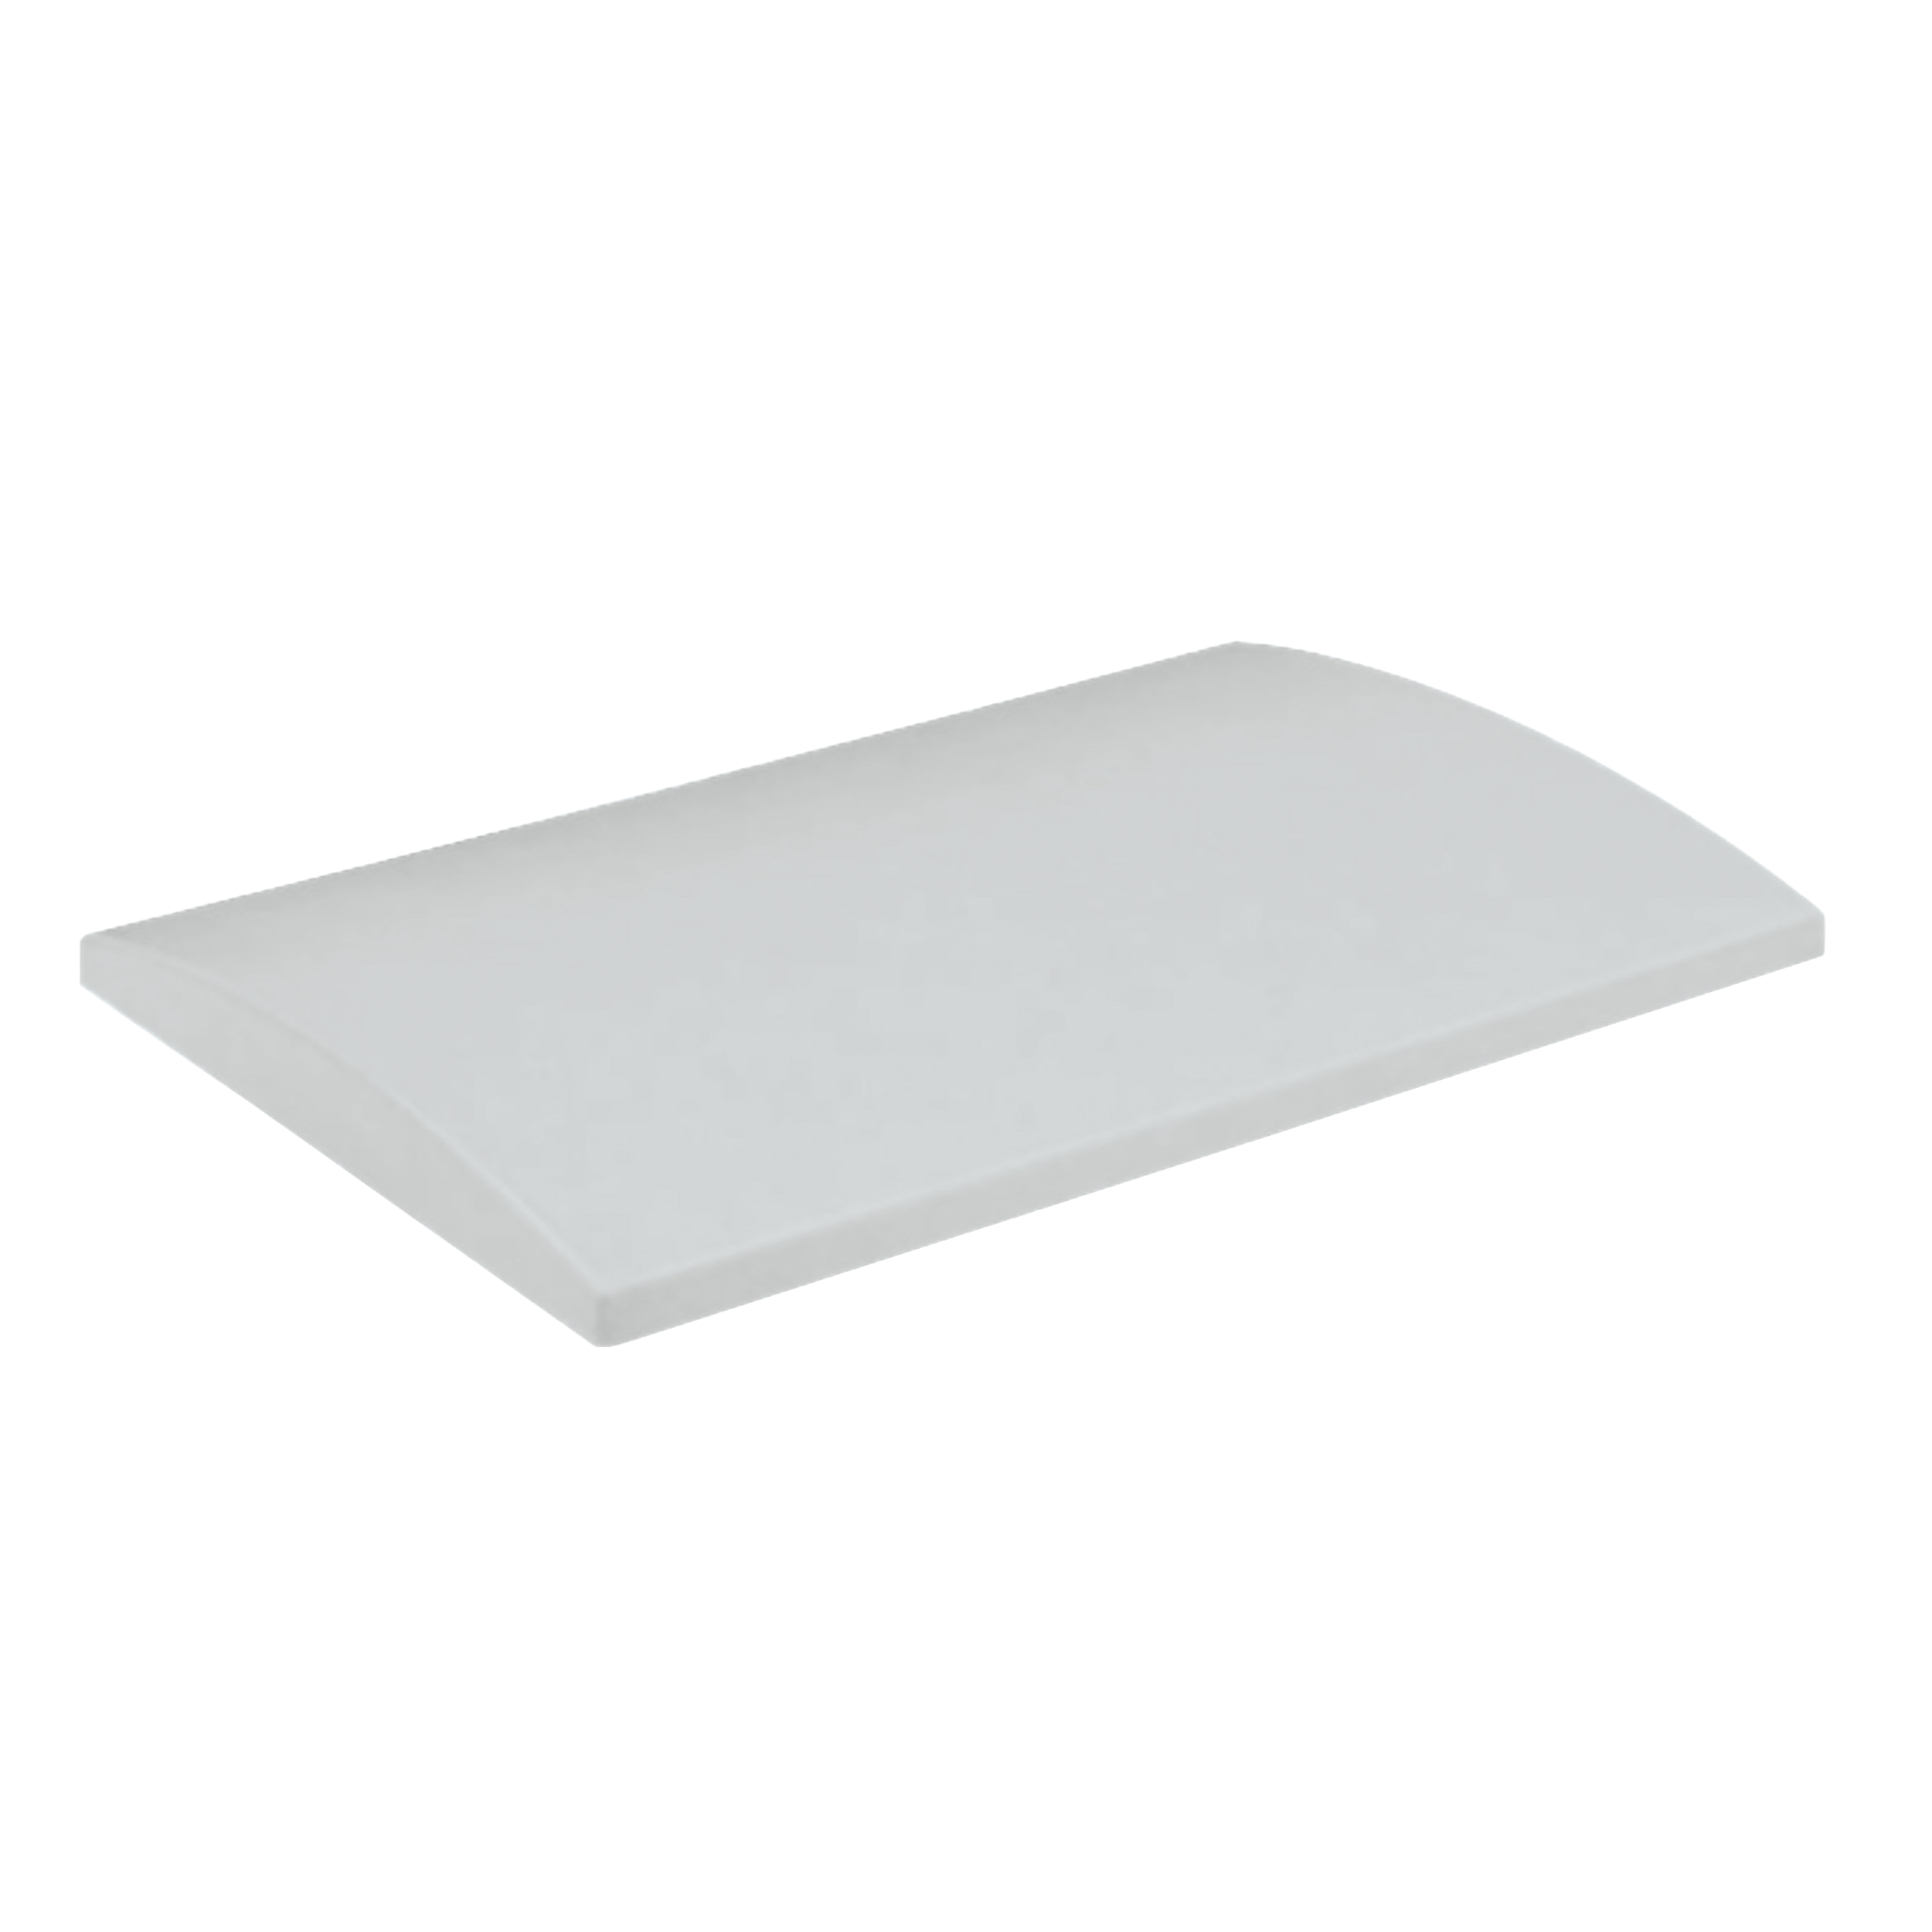 Canopy for PLA encl. 1250 x 620 mm